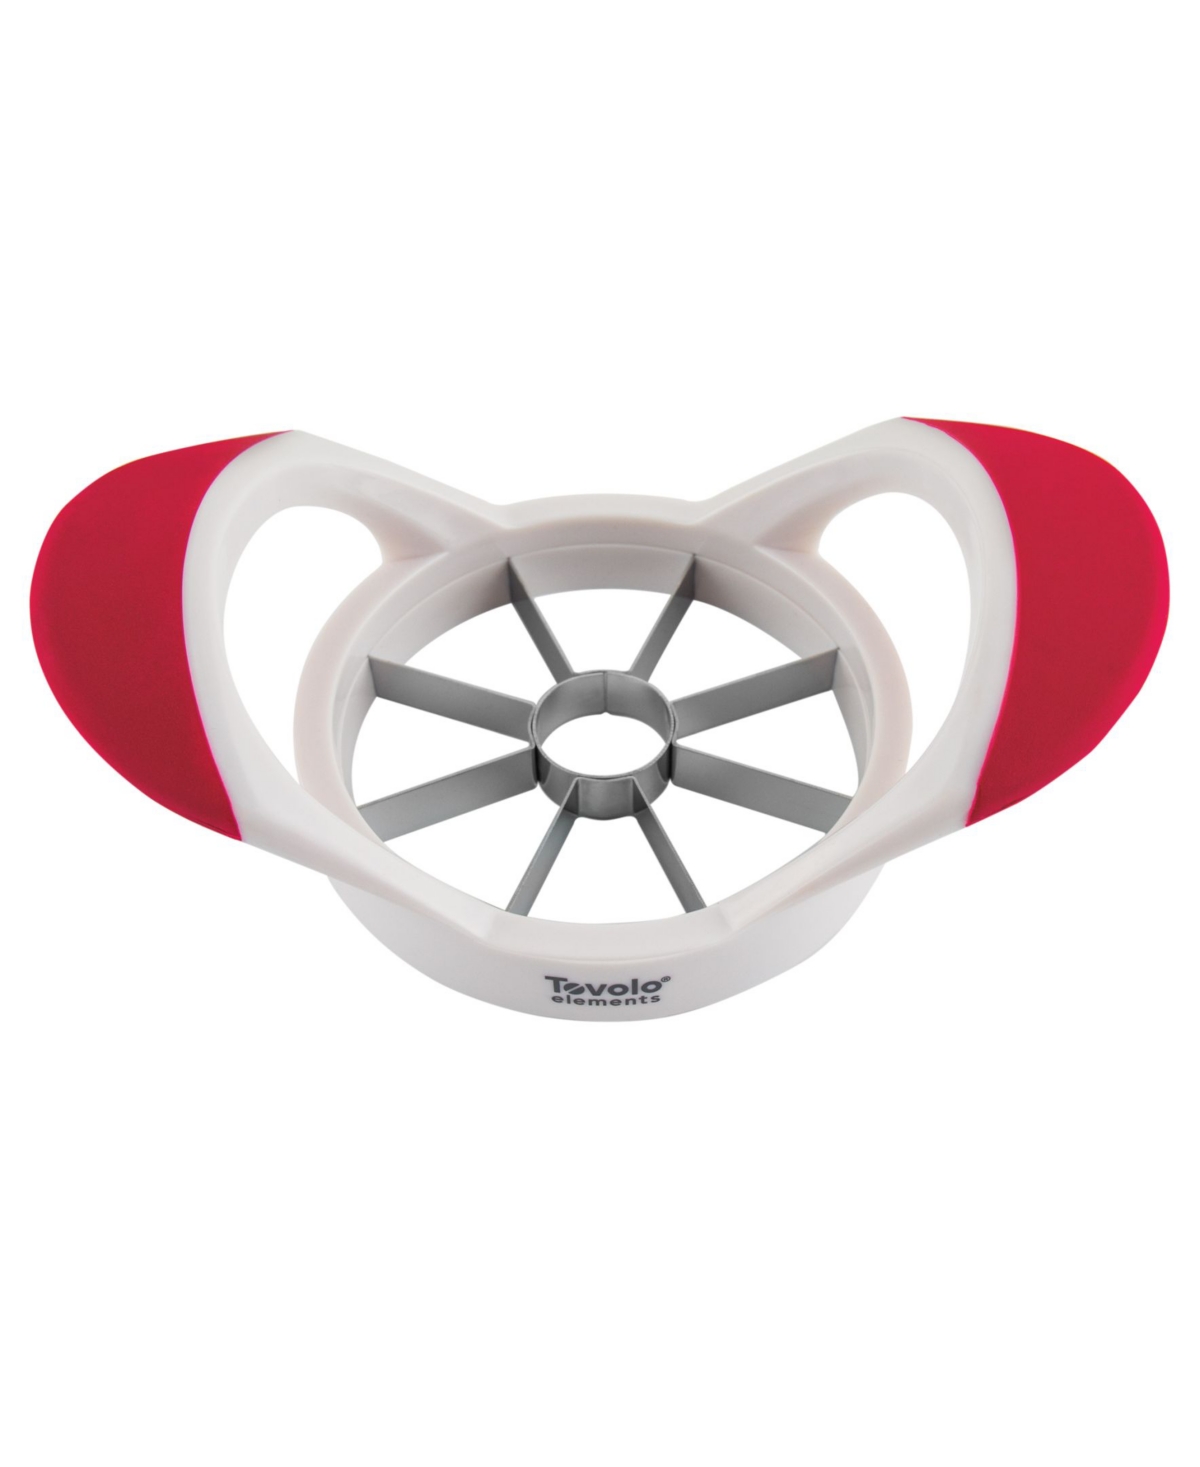 Tovolo Elements Apple Slicer In Red